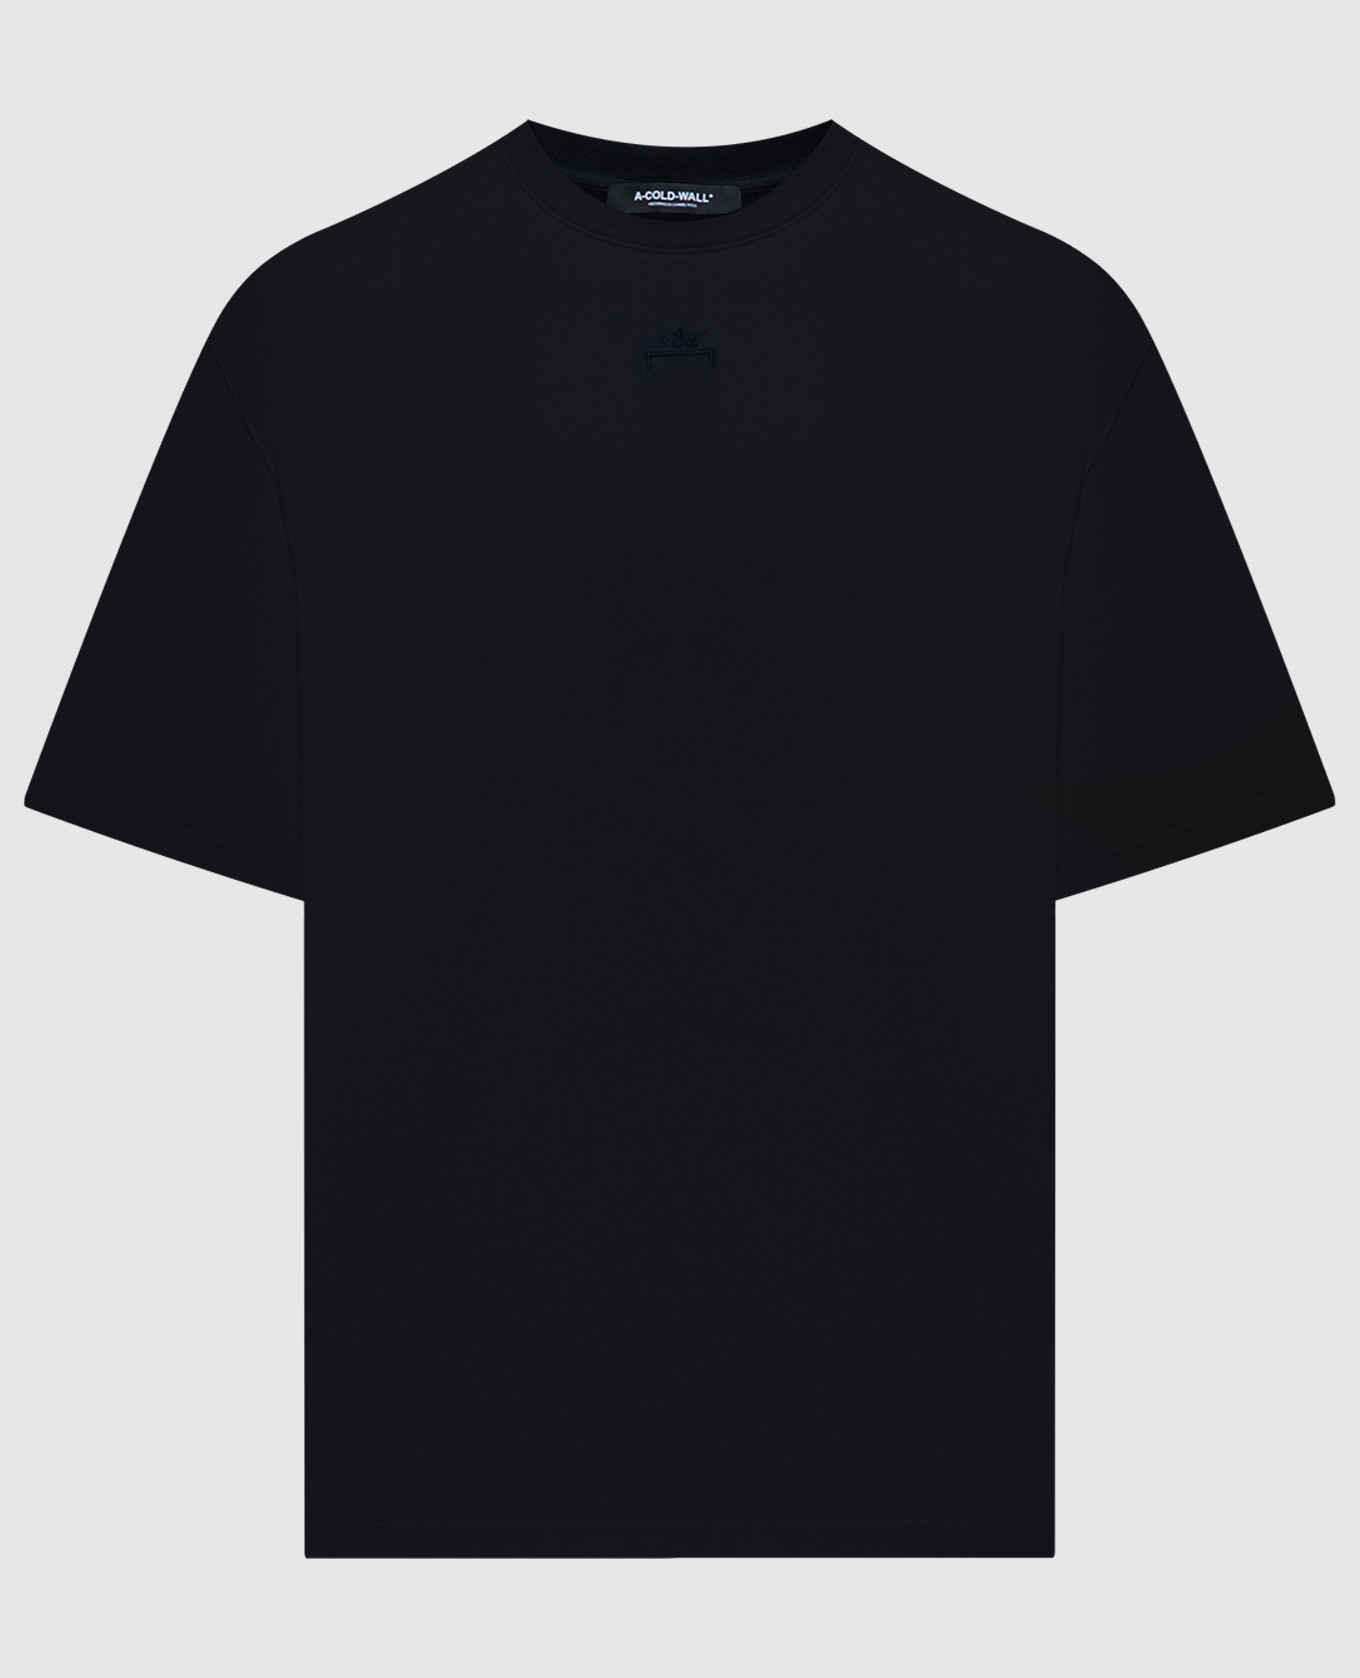 Black t-shirt with logo embroidery